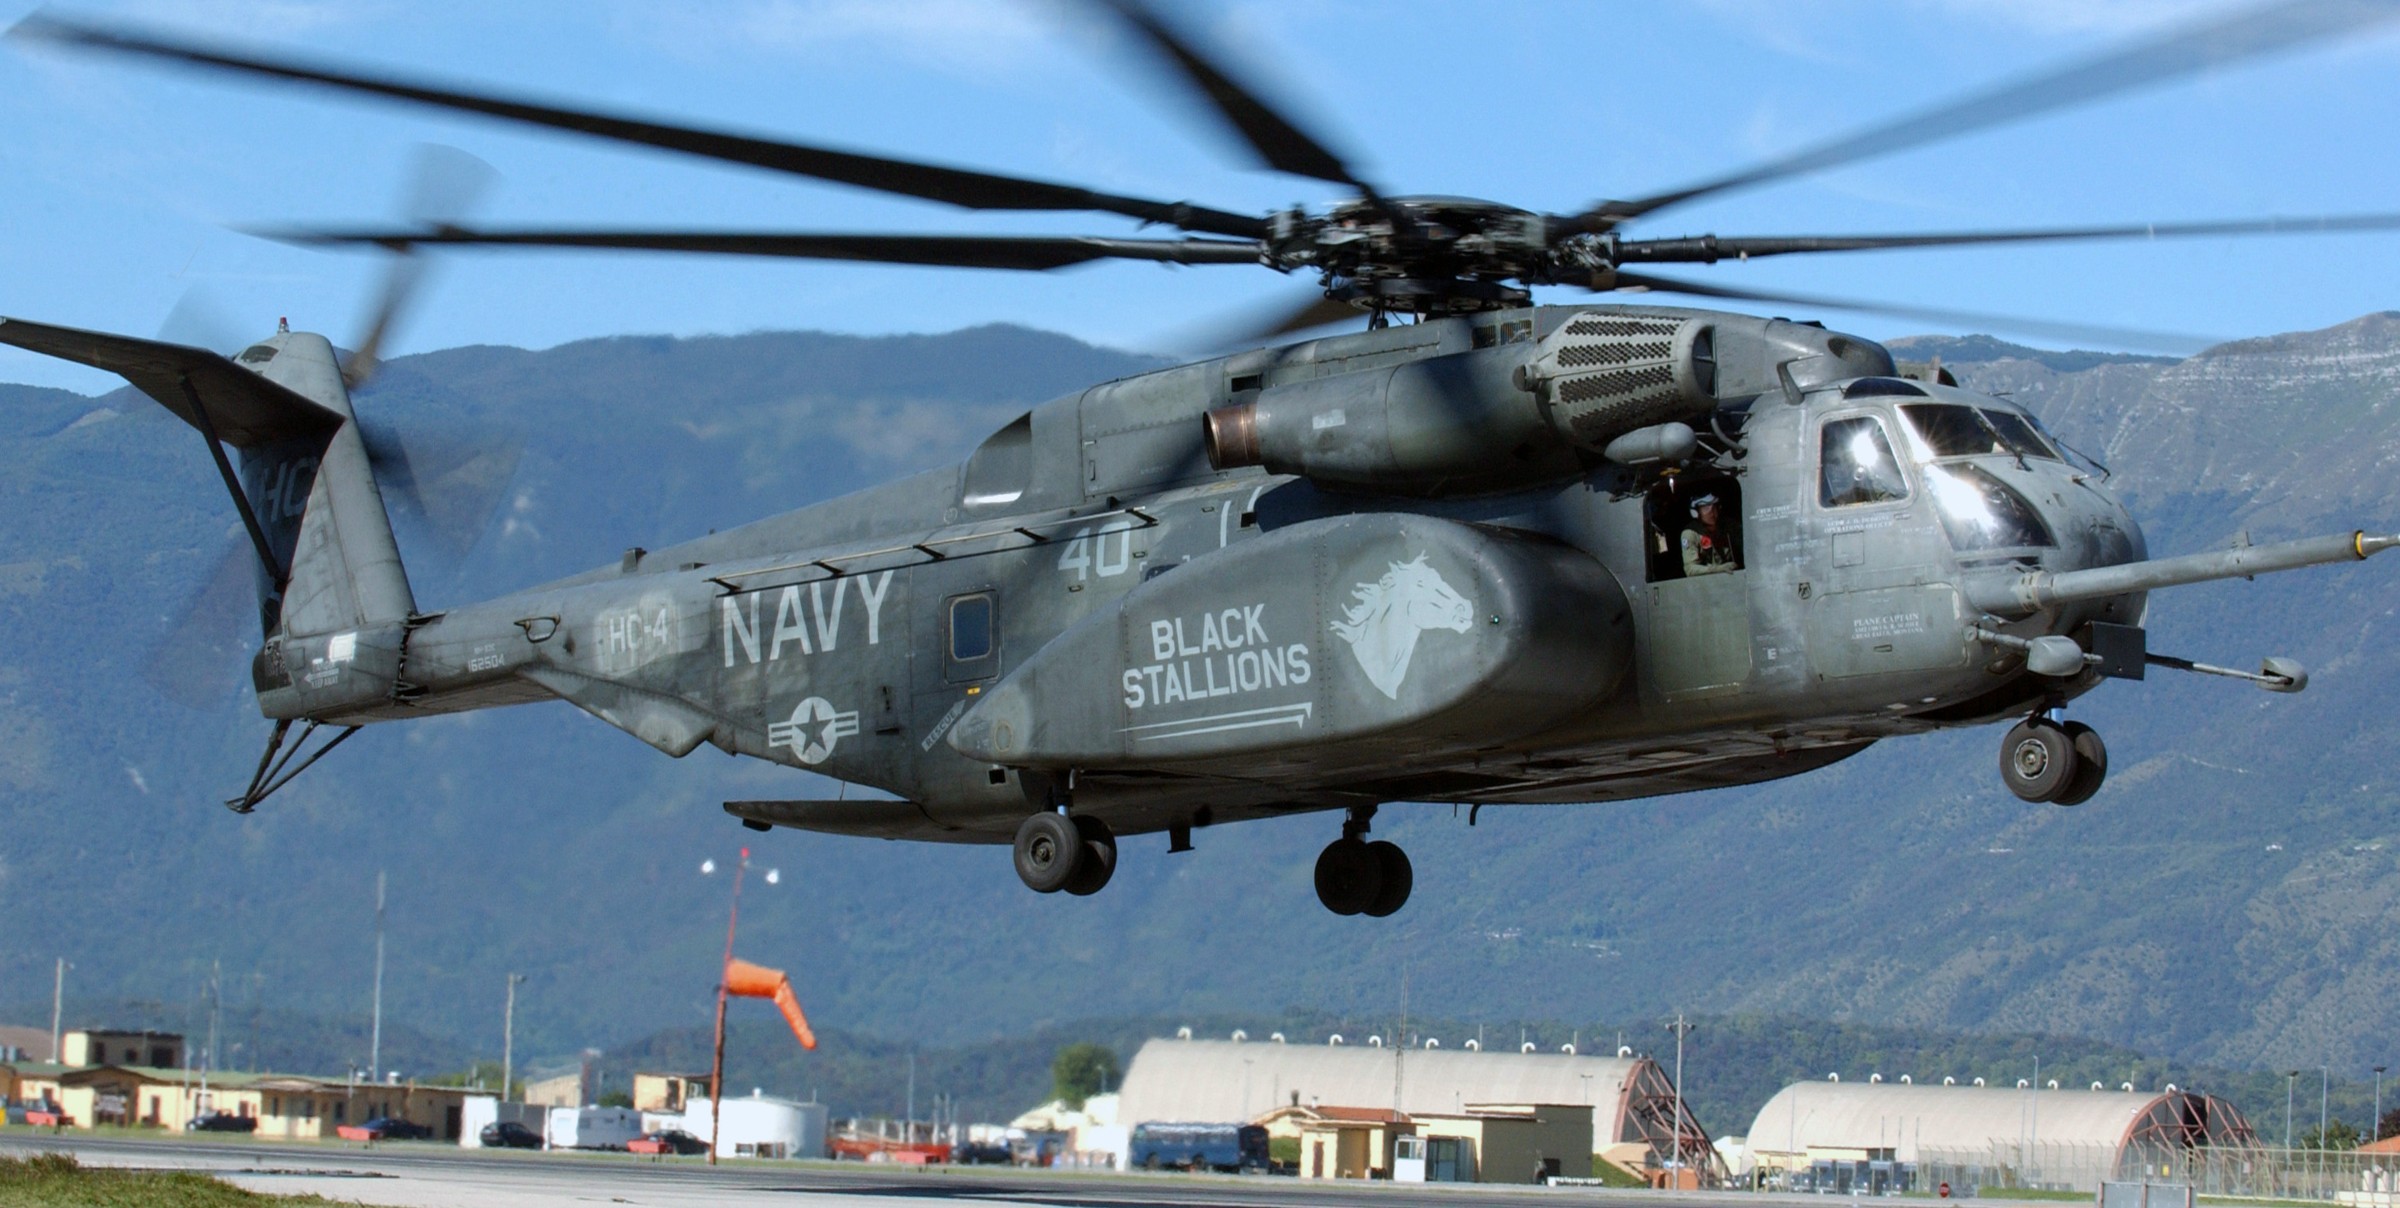 hc-4 black stallions helicopter combat support squadron navy ch-53 mh-53 48x